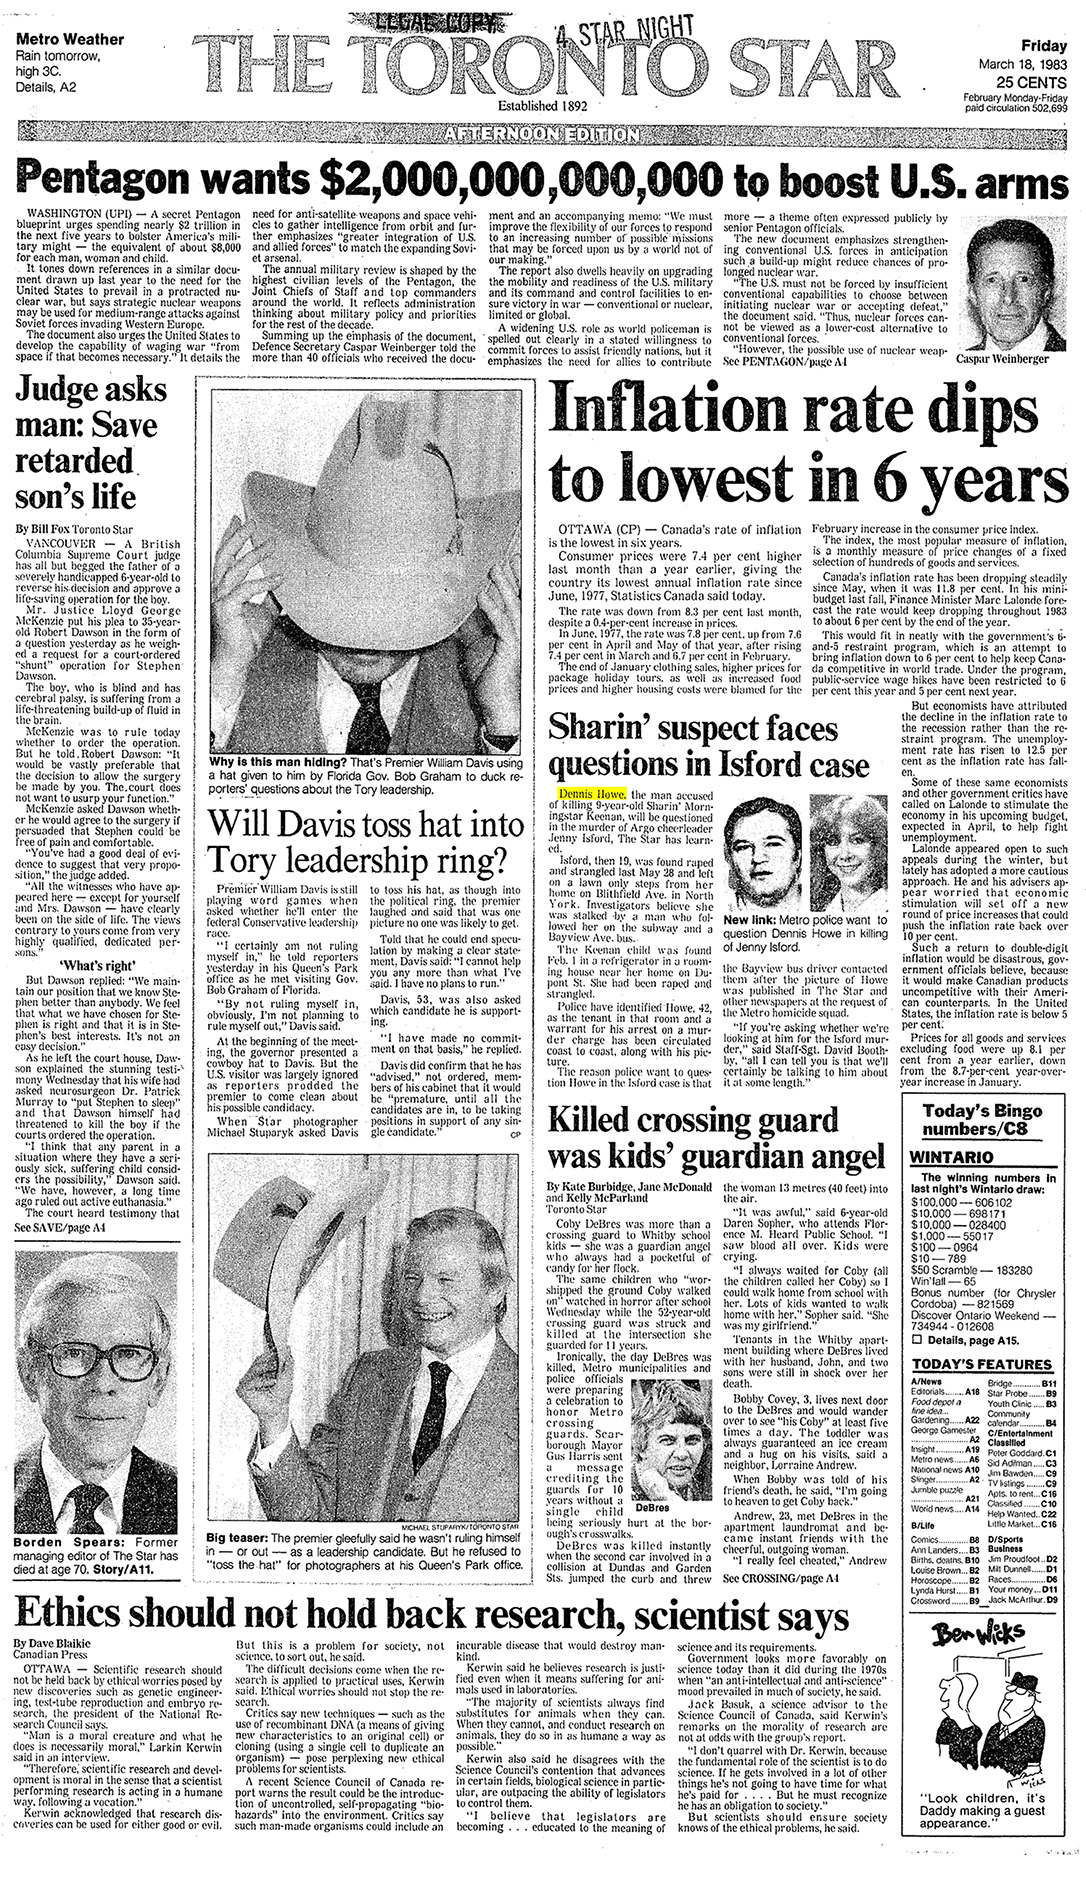 A Toronto Star article dated March 18th, 1983 featuring an article about Dennis Melvyn Howe.